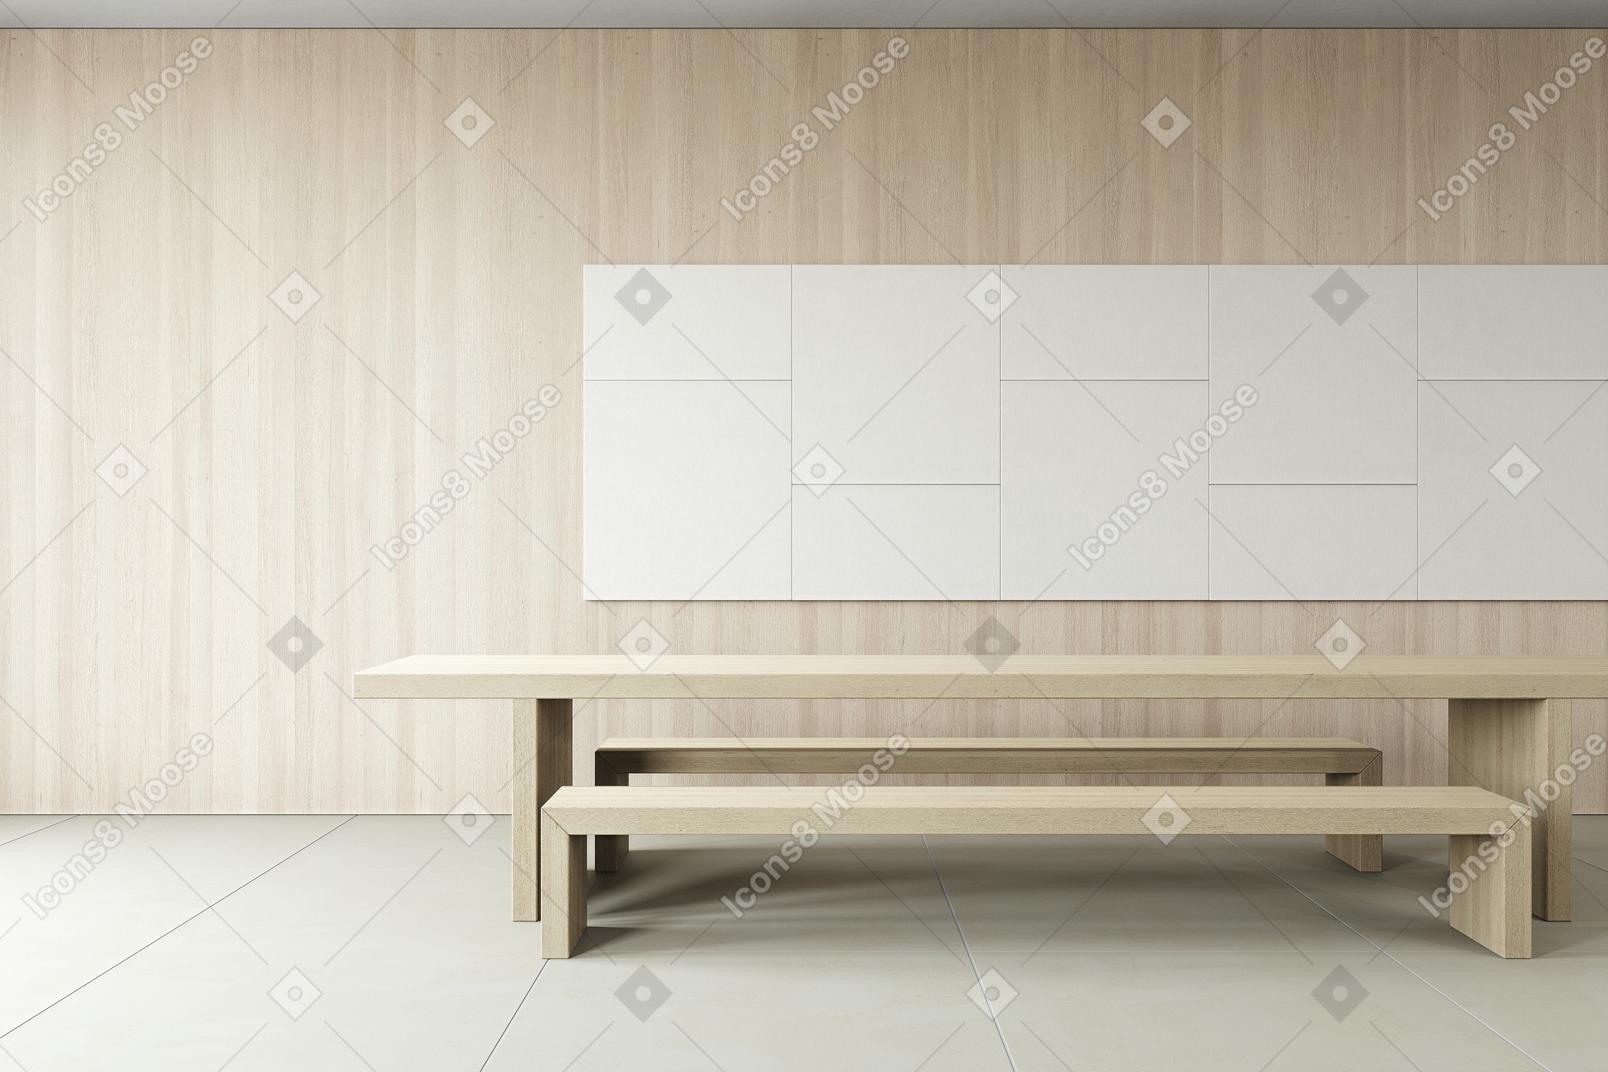 A simple minimalistic room with wooden tables and benches on a simple grey floor